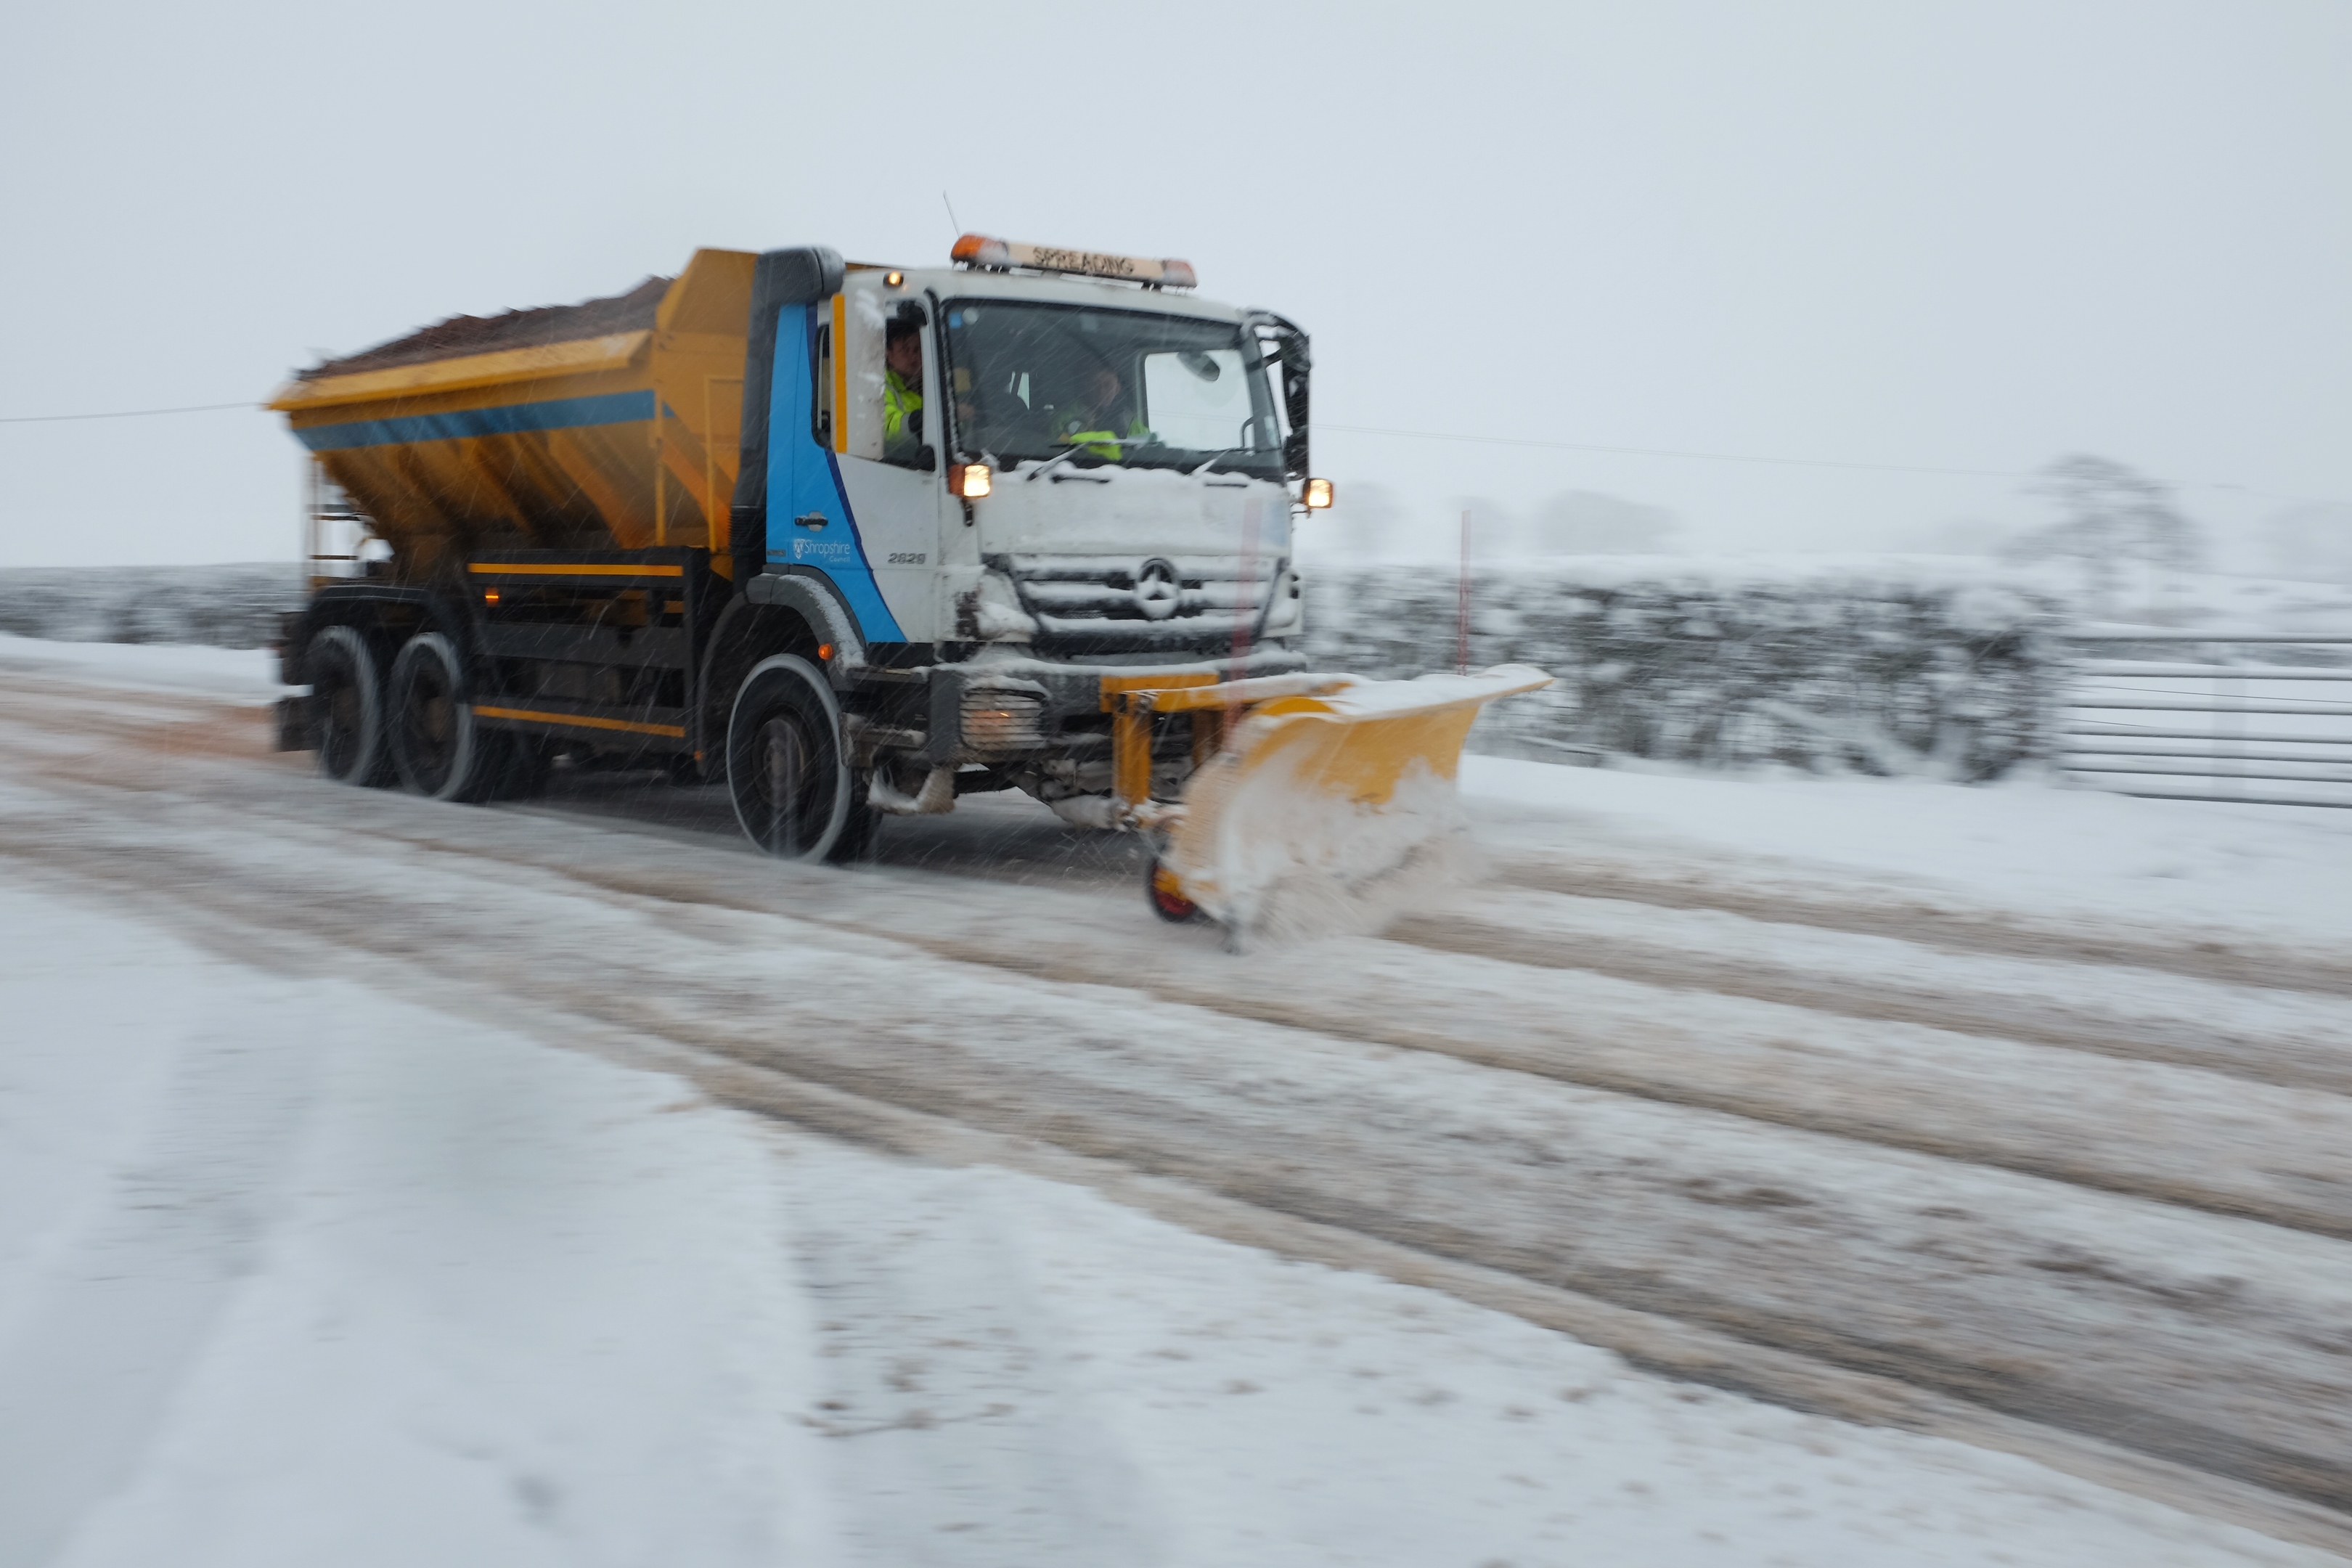 Despite roads being treated, grit may be less effective in low temperatures.